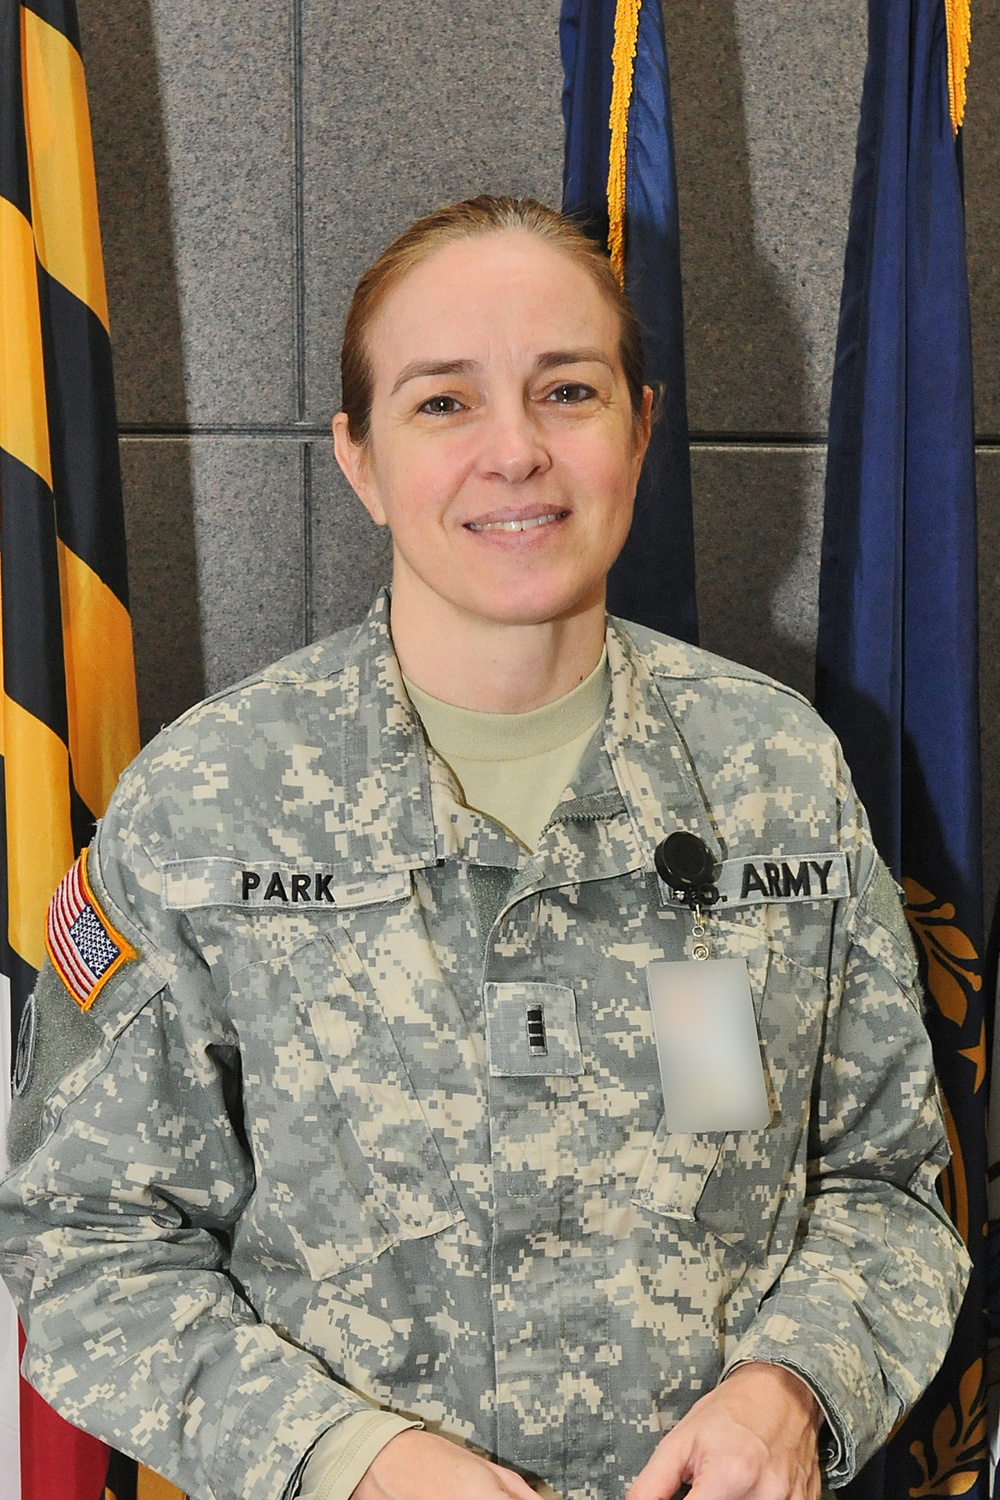 Army Reserve soldier shares her career story of growth and service in the Army